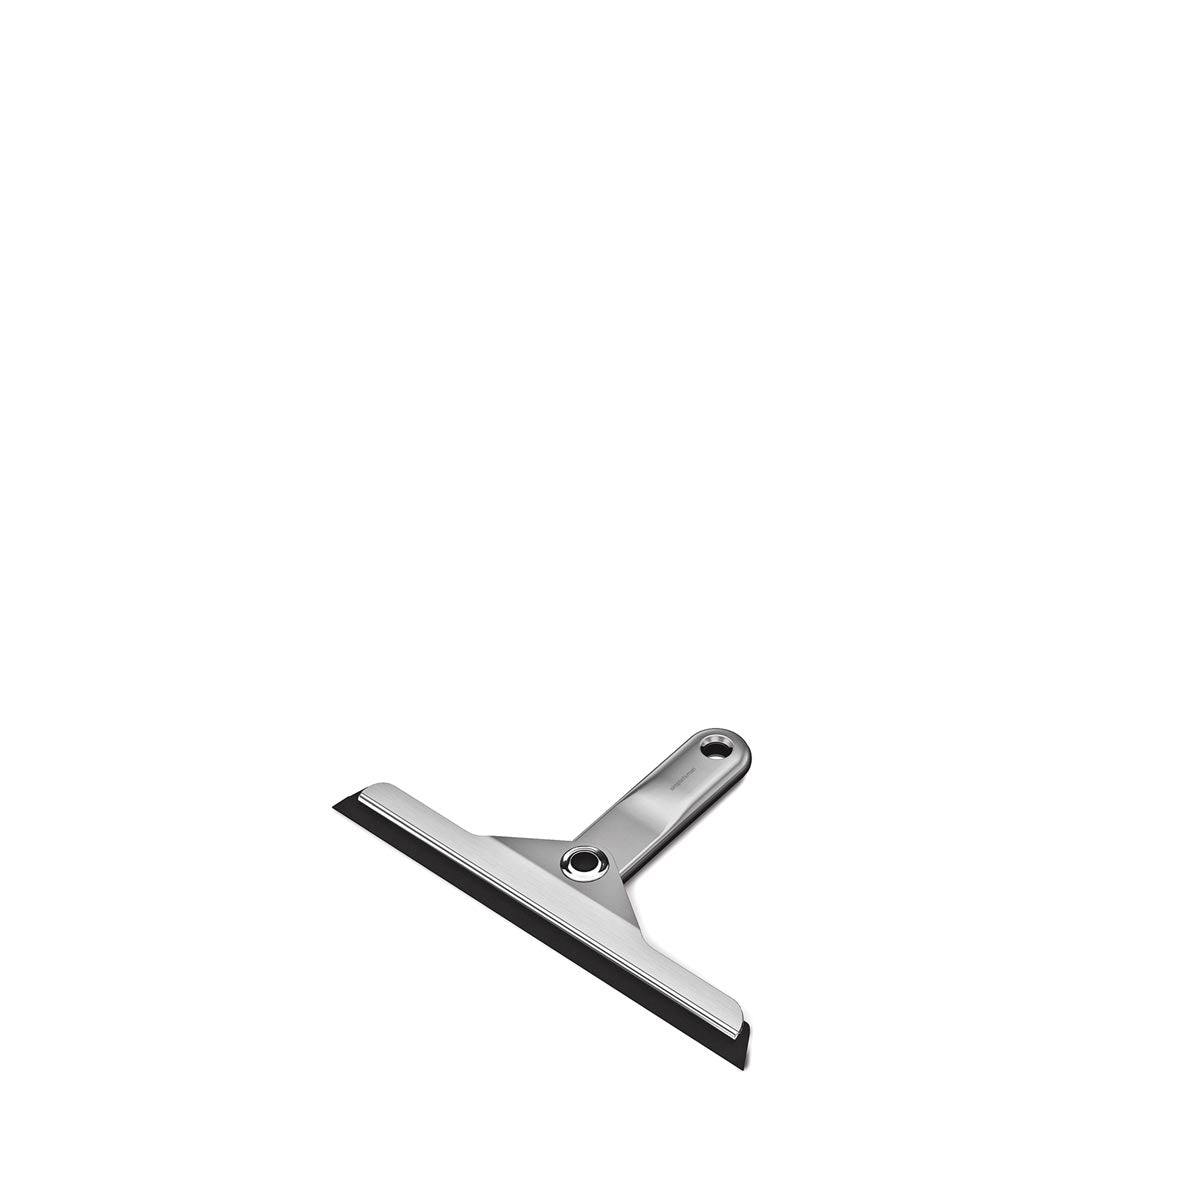 simplehuman foldaway squeegee product support